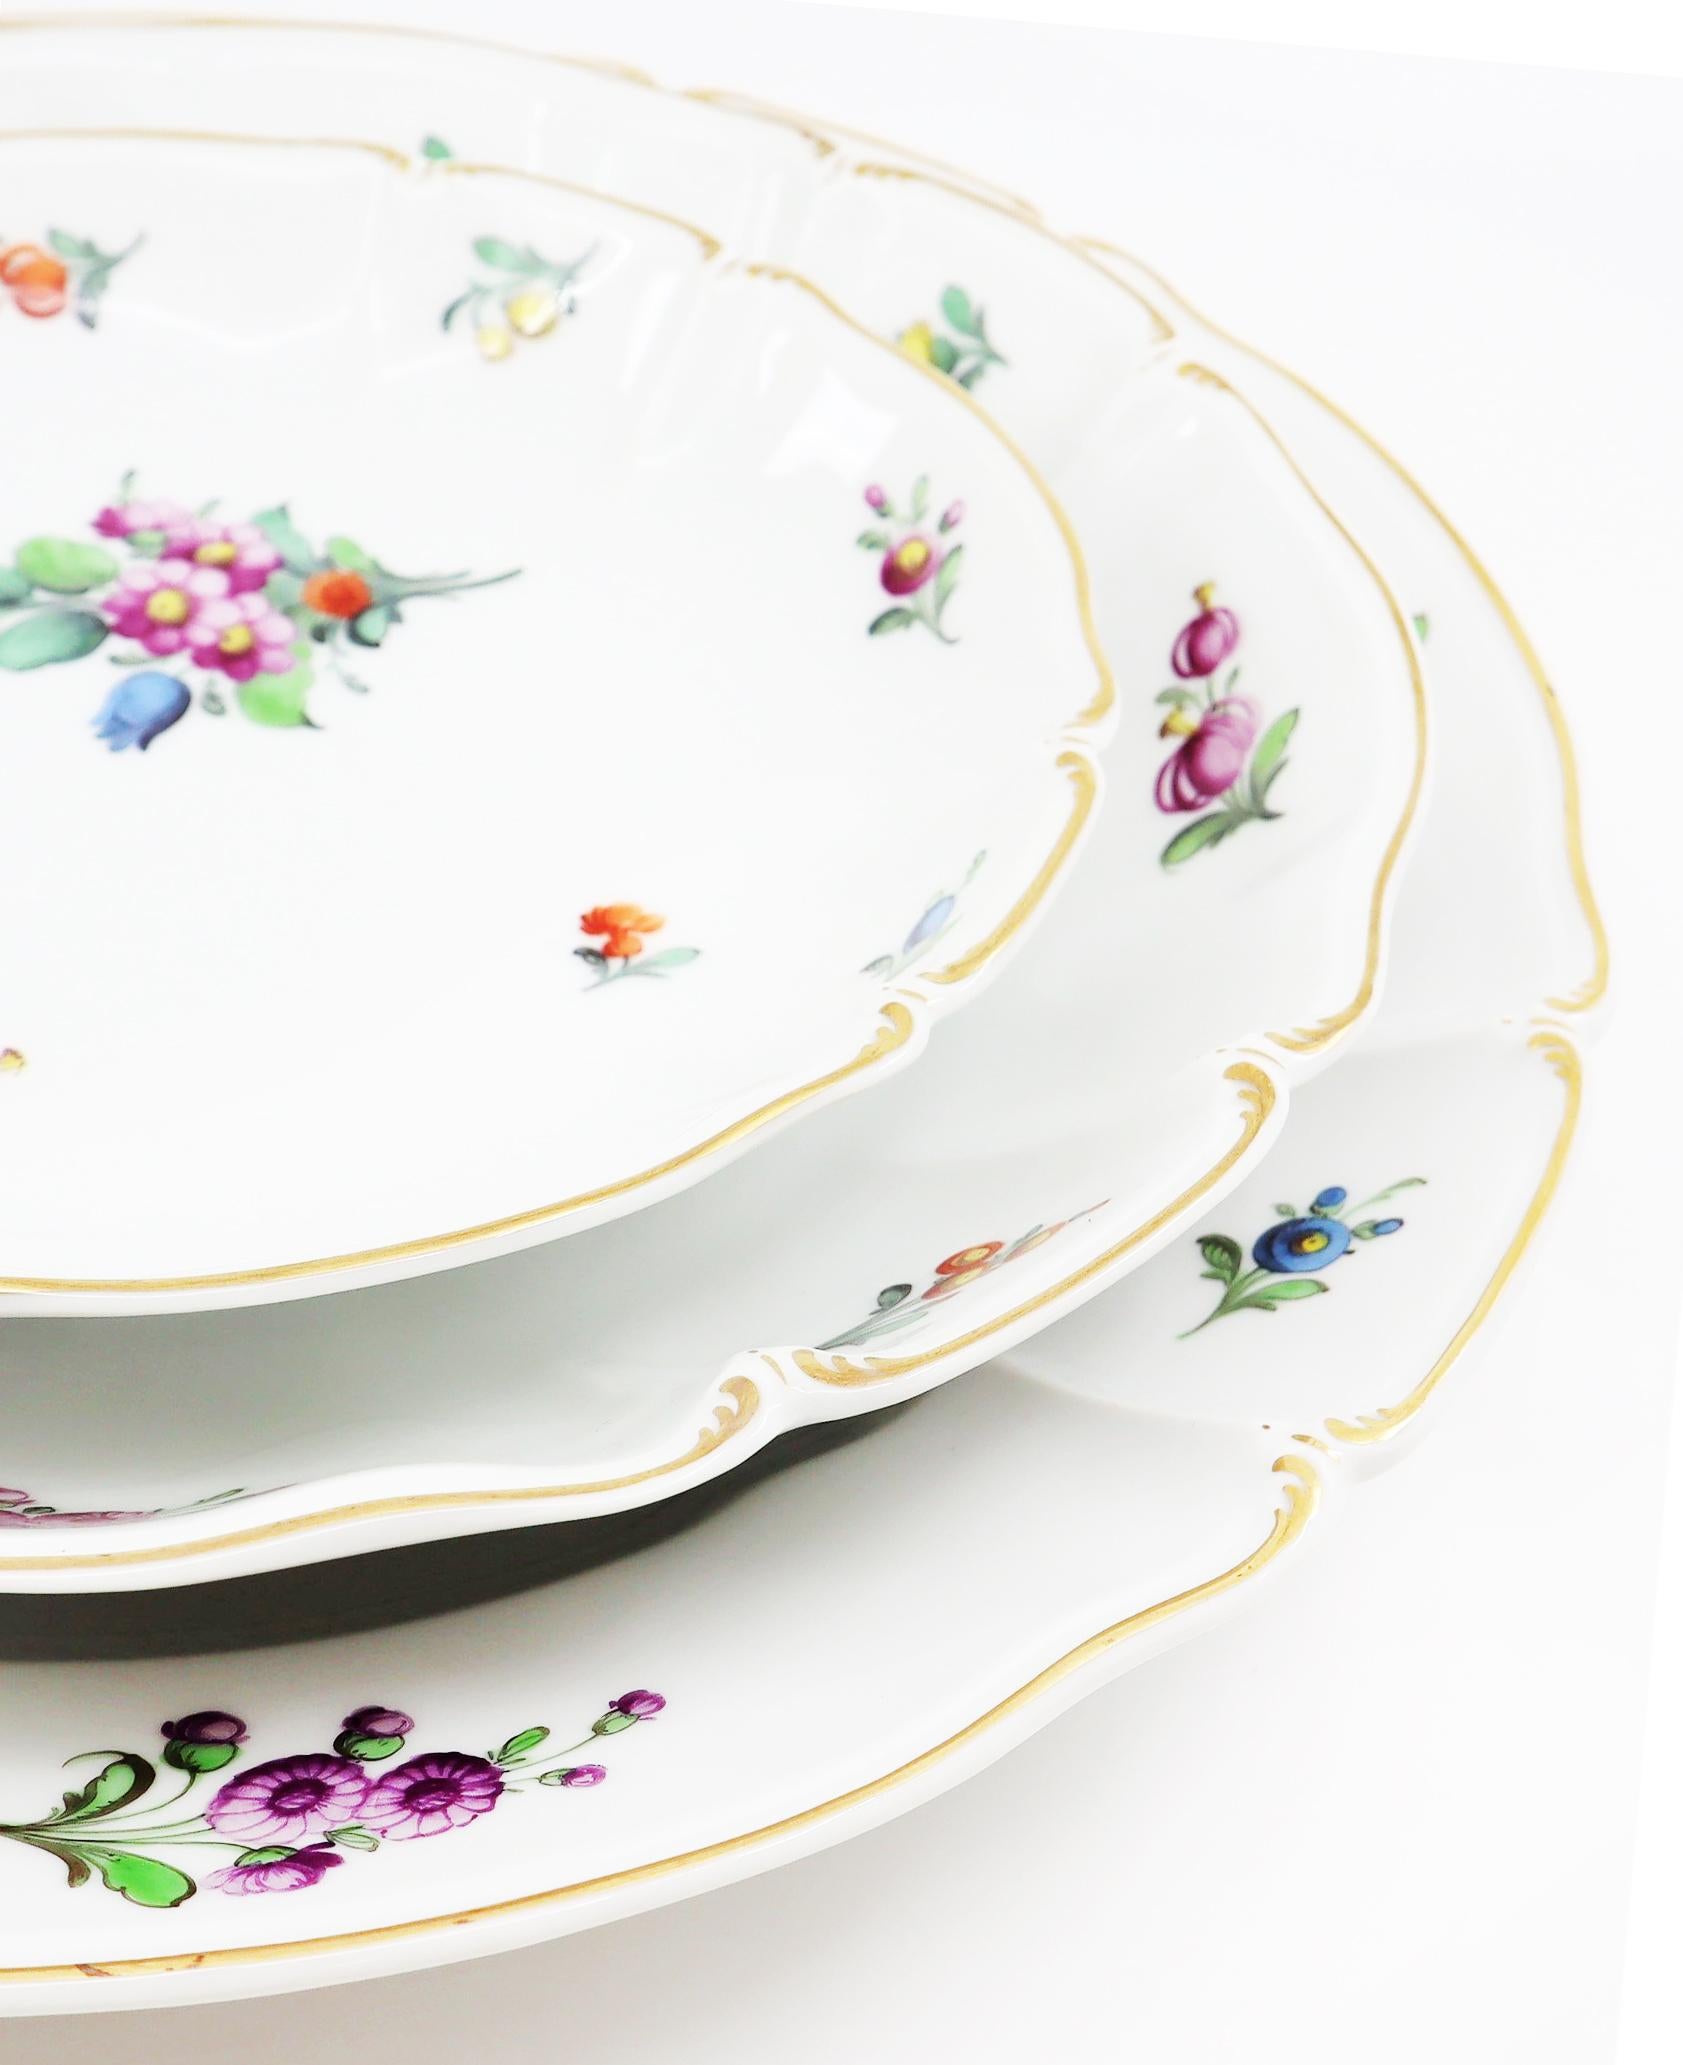 Dinner Service, 19th Century Porcelain, German, Hand Painted with Flowers Décor 1